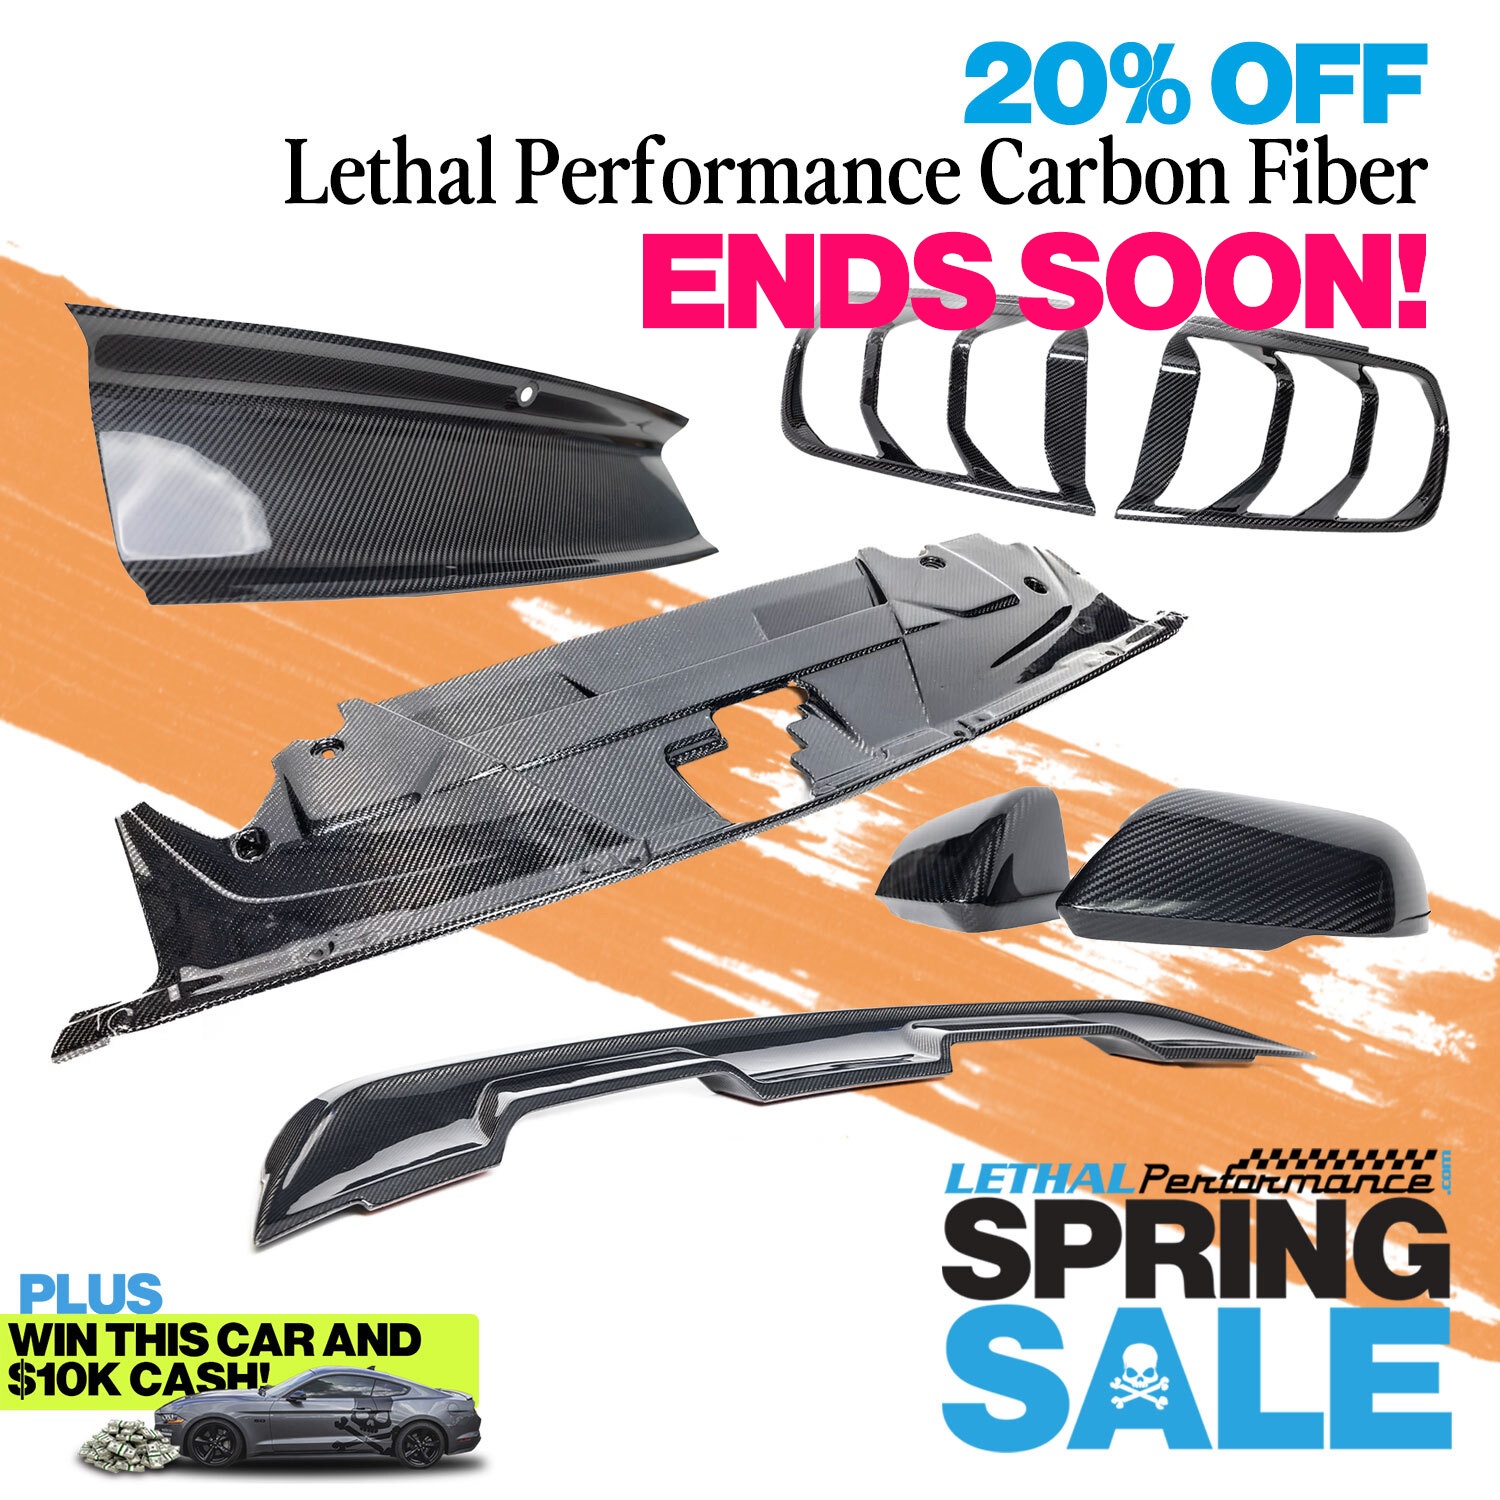 S650 Mustang Spring SALE has SPRUNG here at Lethal Performance!! lp cf end soon spring sale